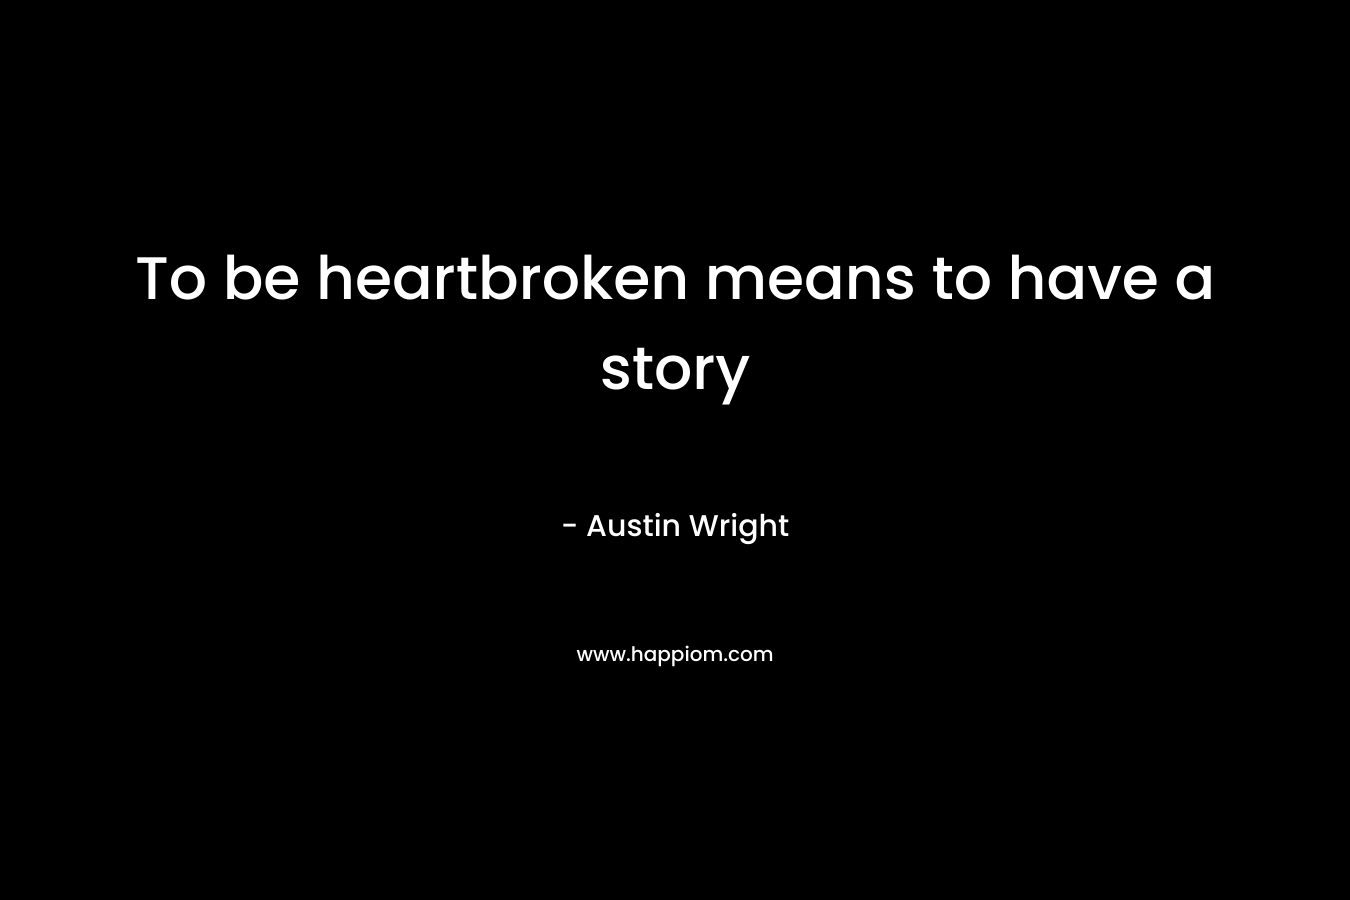 To be heartbroken means to have a story